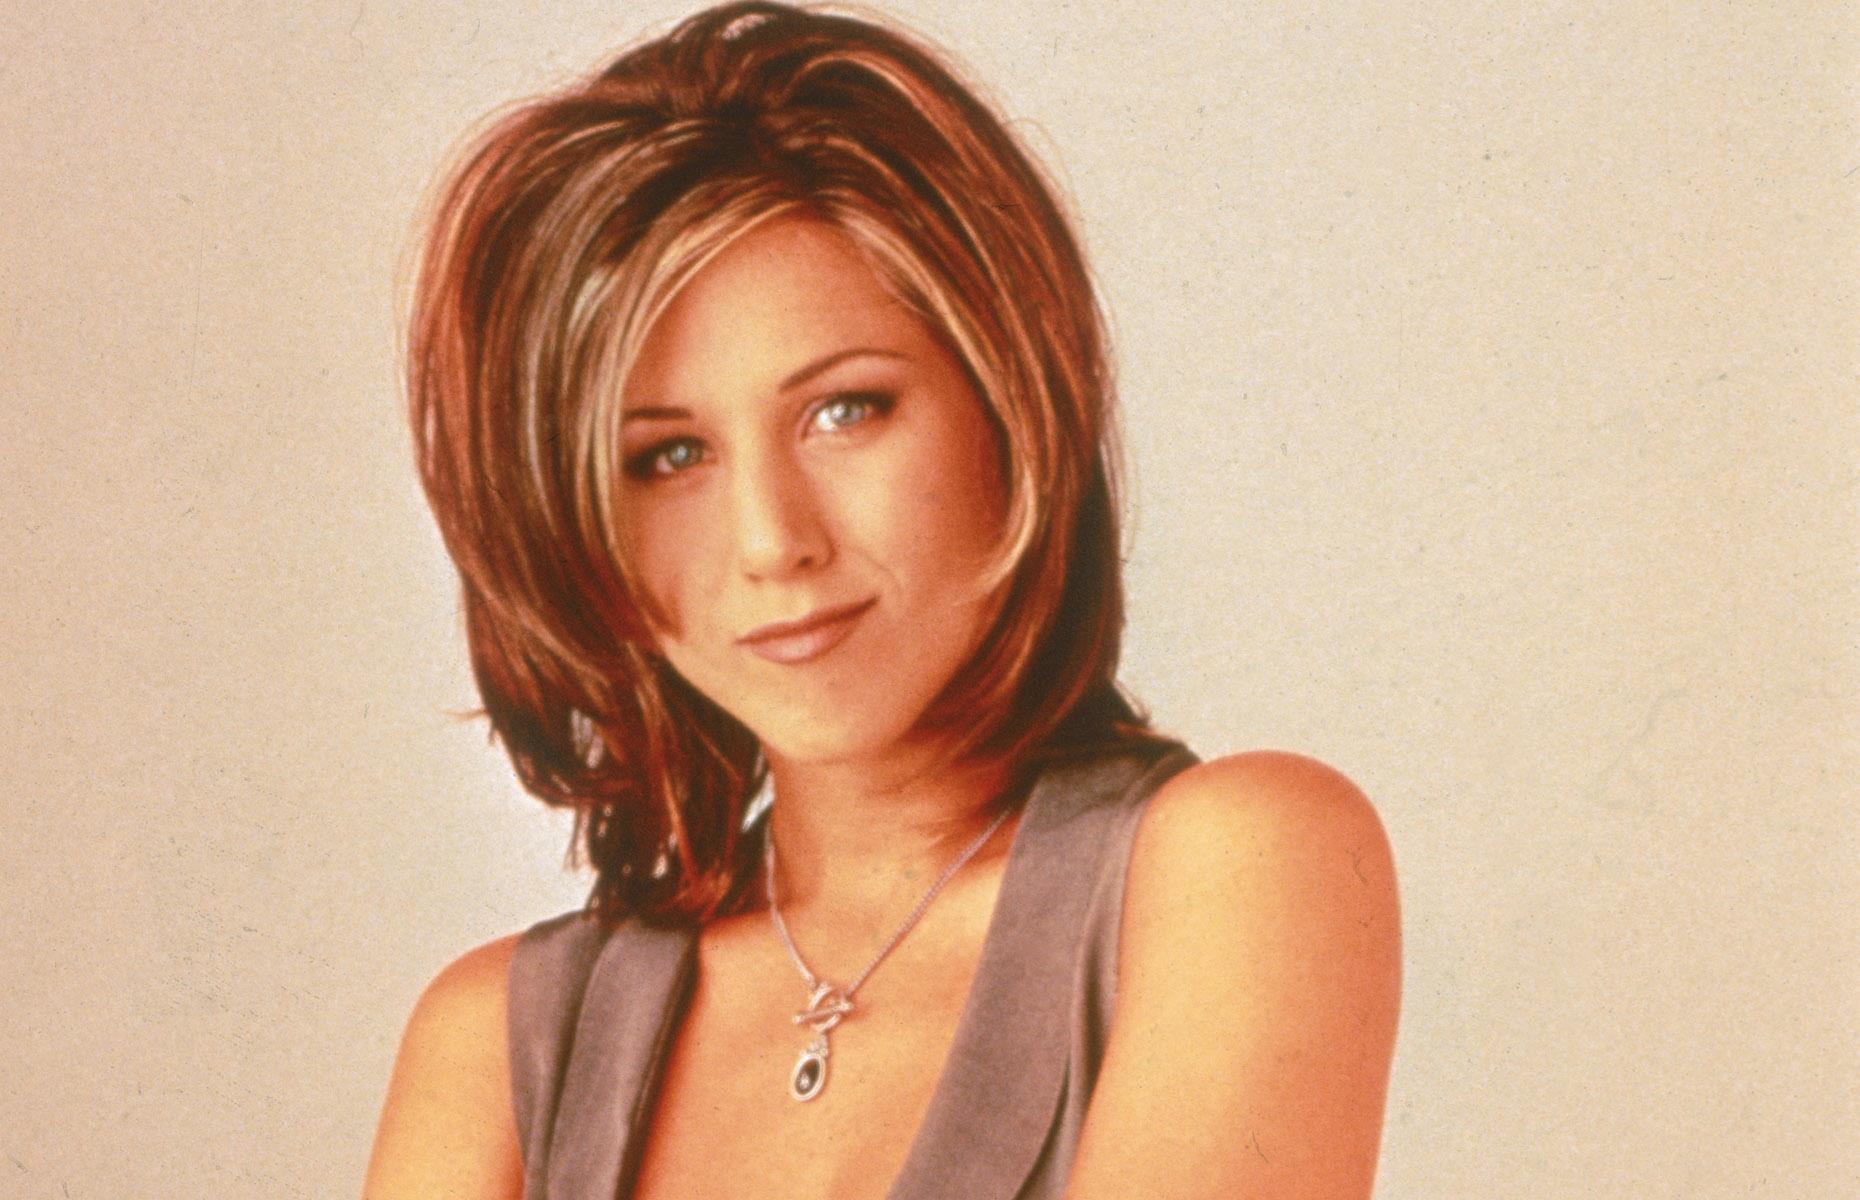 <p>Jennifer Aniston arguably became the most famous member of the <em>Friends</em> troupe. Her role as Rachel Green kicked off her acting career, and she’s not looked back, appearing in blockbuster hits like 2004's <em>Along Came Polly,</em> the 2008 tearjerker <em>Marley and Me</em>, and <em>Horrible Bosses</em> in 2011.</p>  <p>She made a triumphant return to TV, starring alongside Reese Witherspoon in the award-winning Apple TV+ series <em>The Morning Show</em>. </p>  <p>The sought-after star has also landed several lucrative endorsements with huge companies like Emirates, Aveeno, and SmartWater.</p>